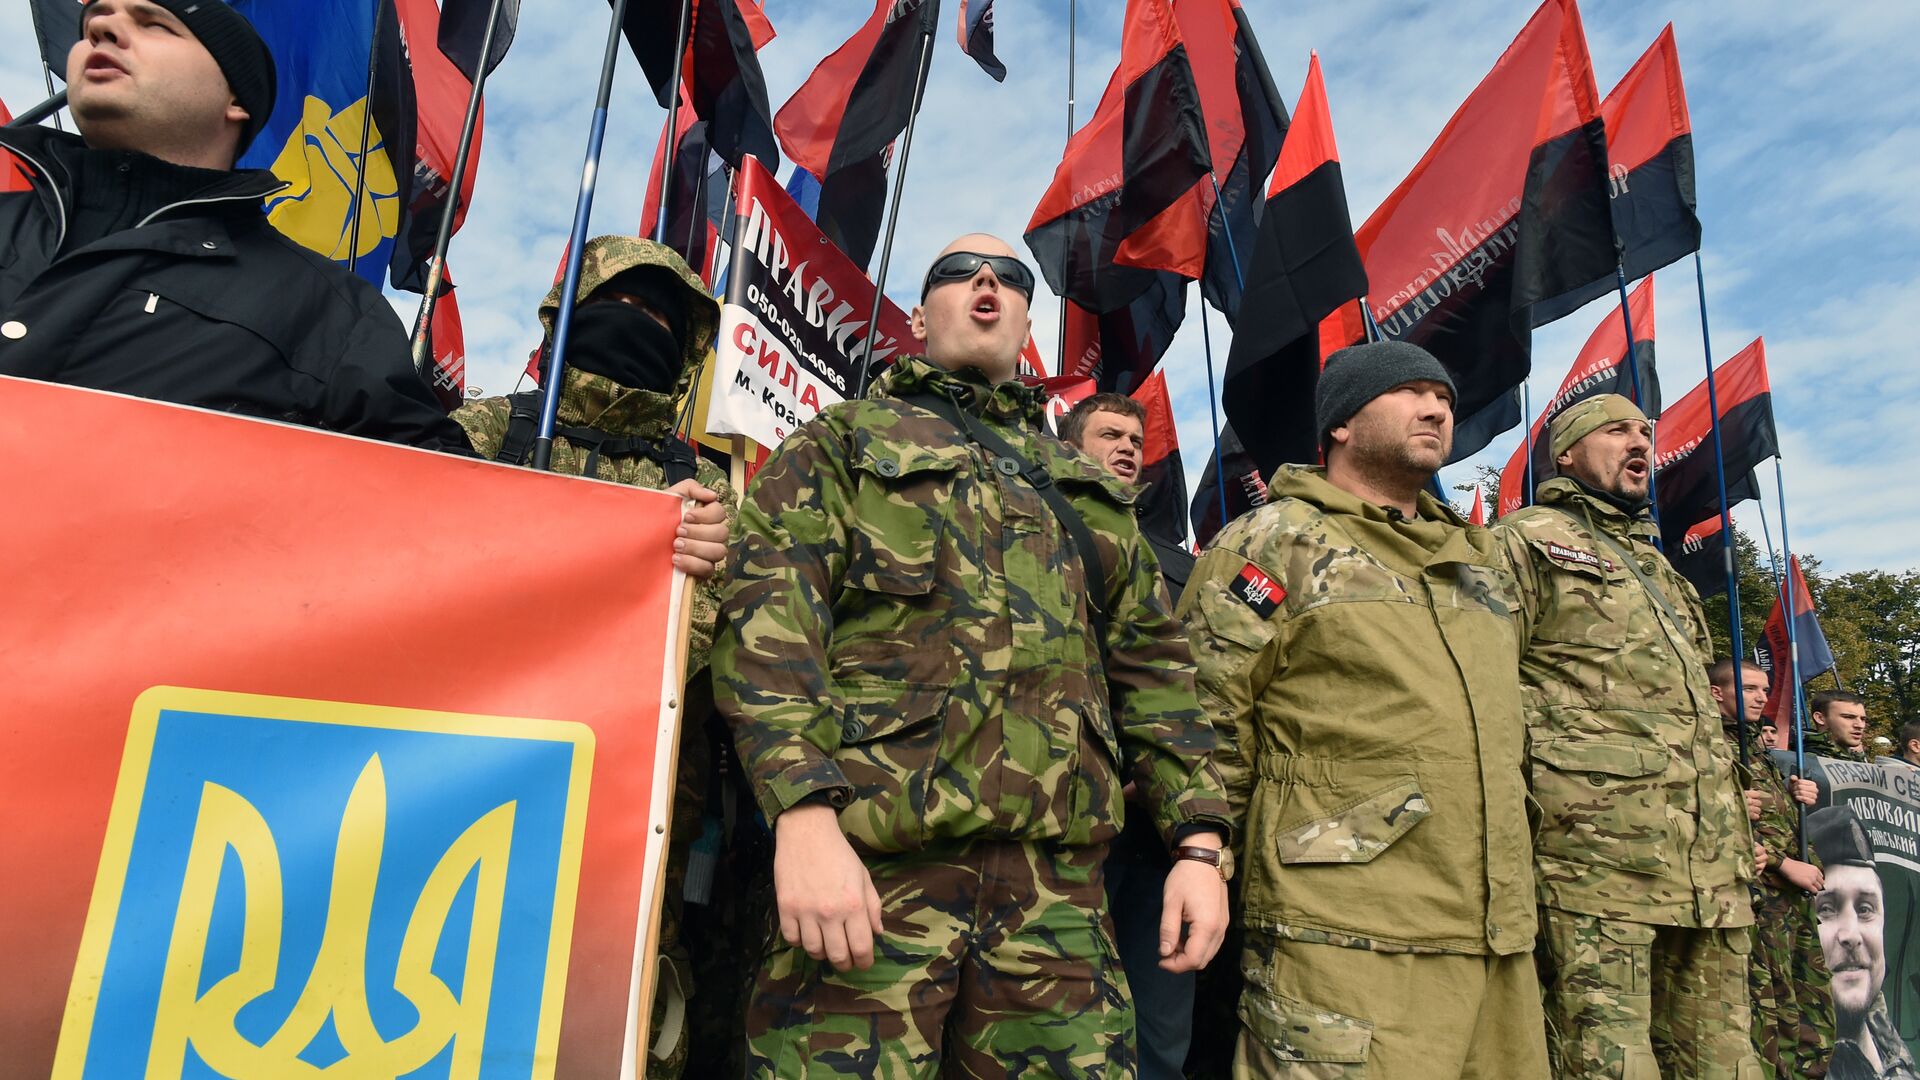 Members of far right movement Right Sector and supporters of nationalists parties wave flags as they attend a rally in Kiev on October 14, 2015 - Sputnik International, 1920, 03.05.2022